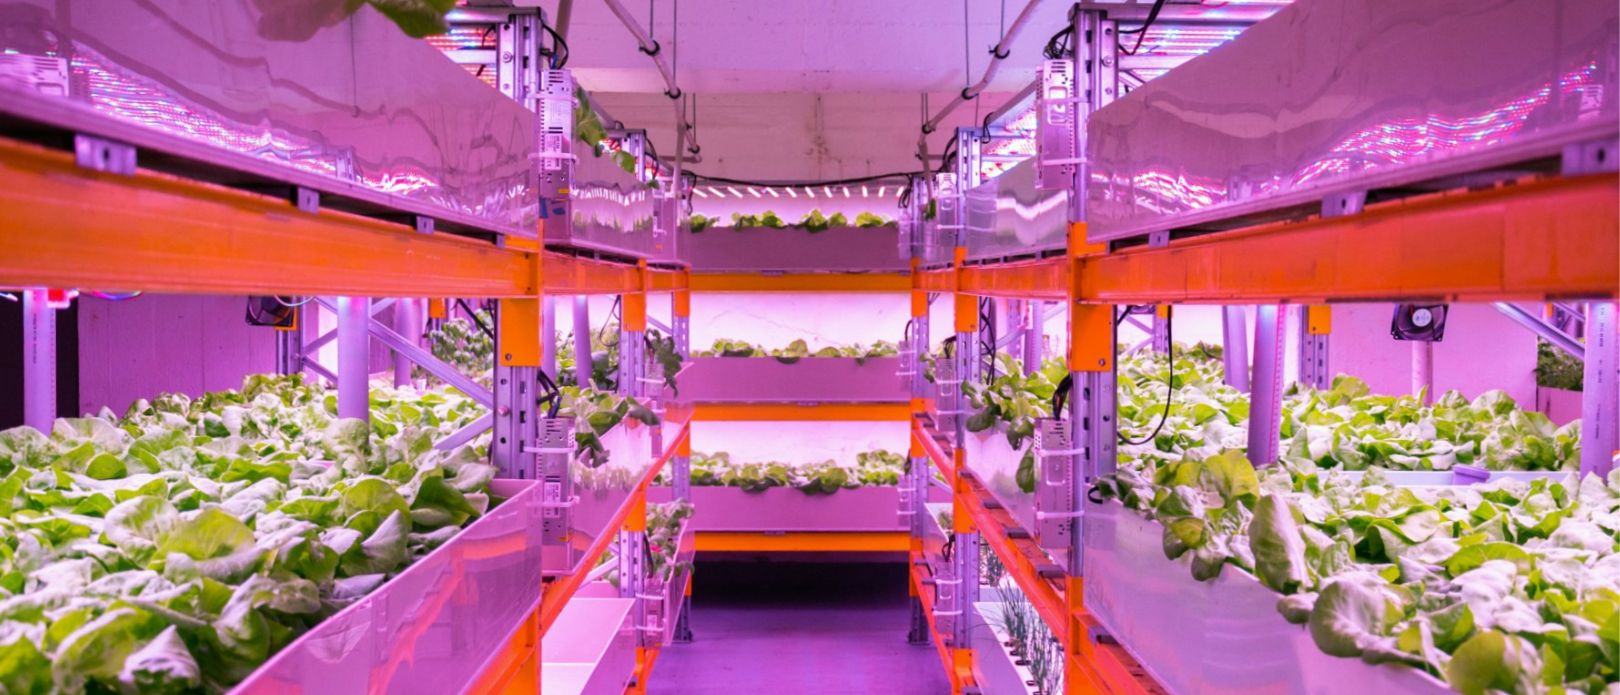 Photo of two rows of indoor shelves where lettuce is growing in an aquaponics system under pink artificial lighting. 